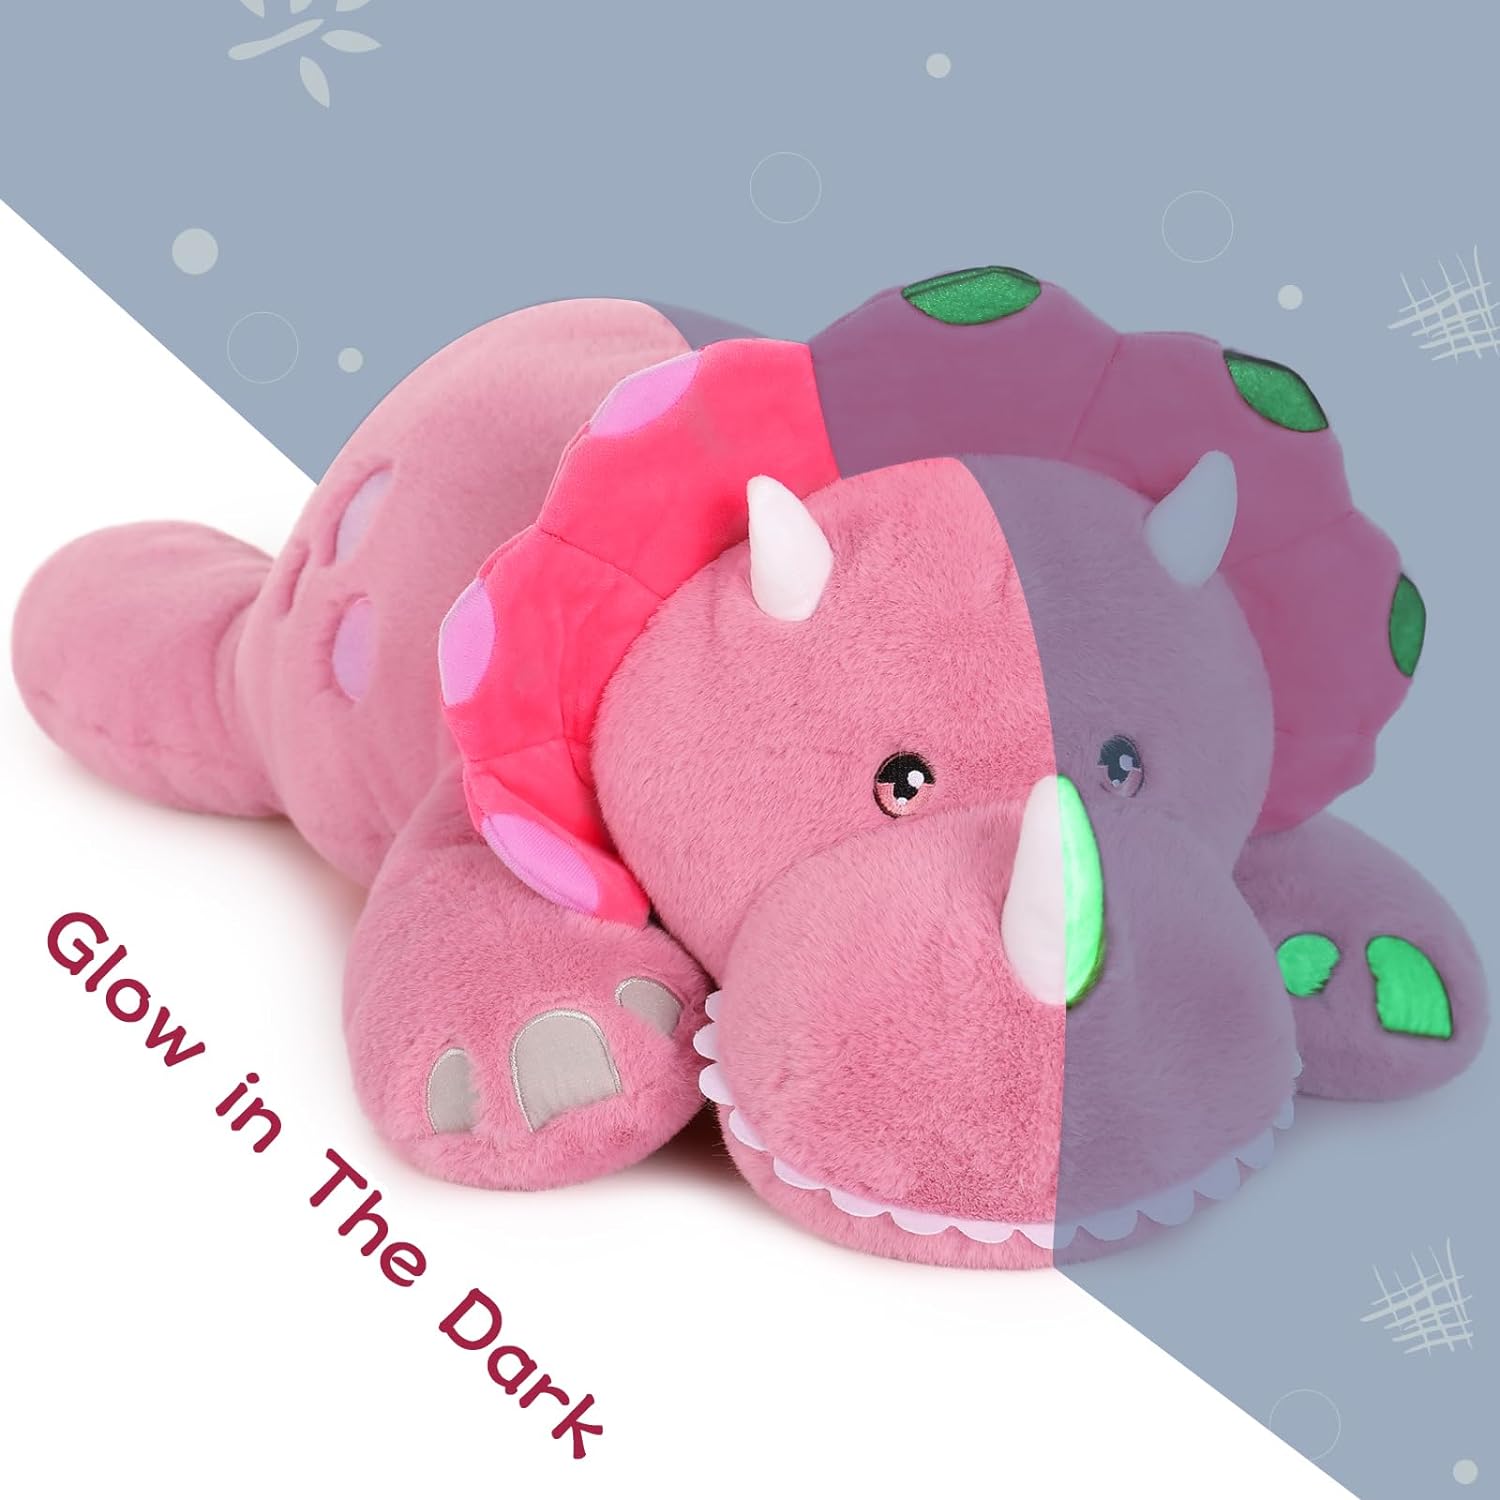 Triceratops Glow-in-the-dark Weighted Plush Toy, Pink, 31.5 Inches